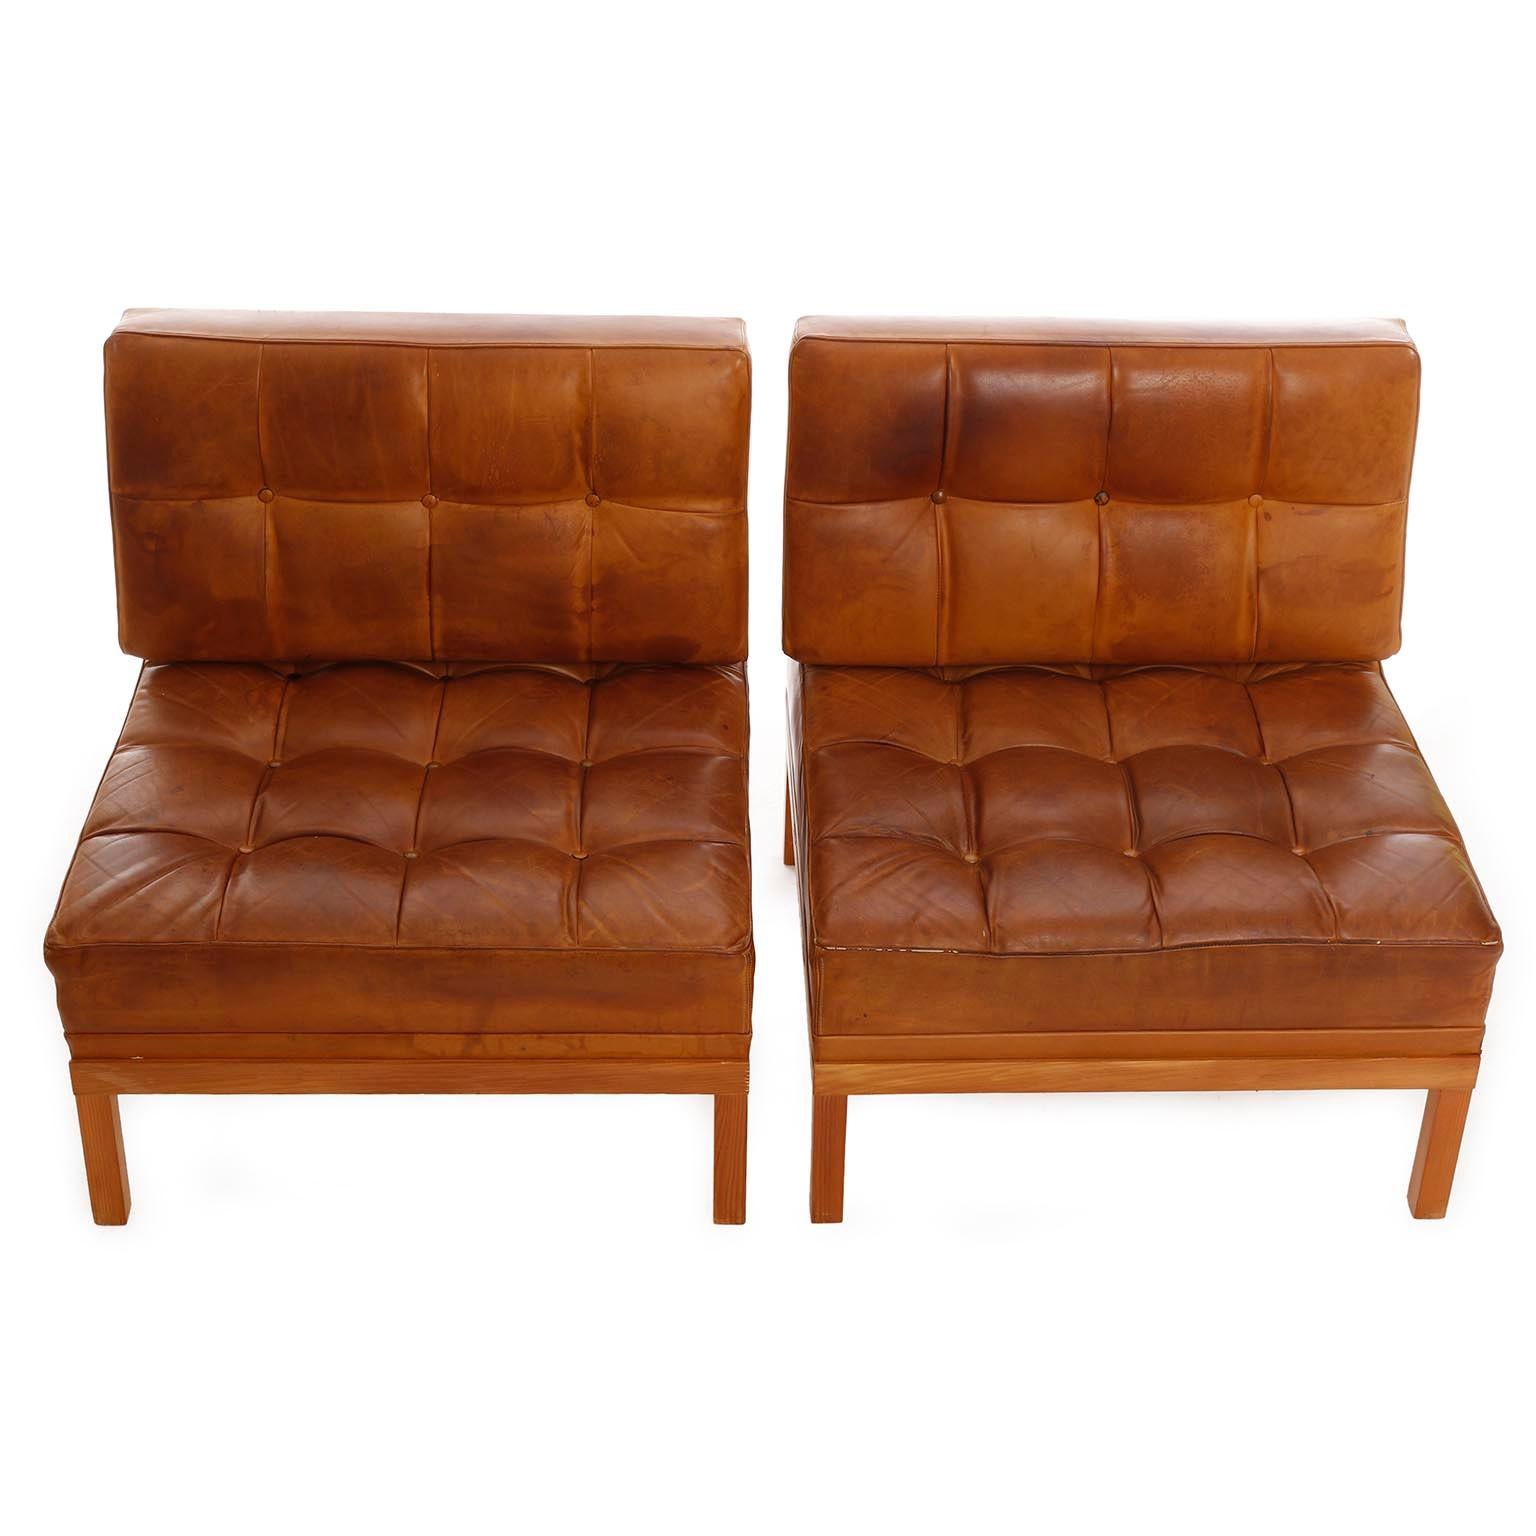 A pair of tufted chairs with loose cushions from the 'Constanze' (engl. Constance) series designed by Prof. Johannes Spalt for Wittmann, Austria, manufactured in midcentury. Johannes Spalt designed the 'Constanze' series which includes sofas,